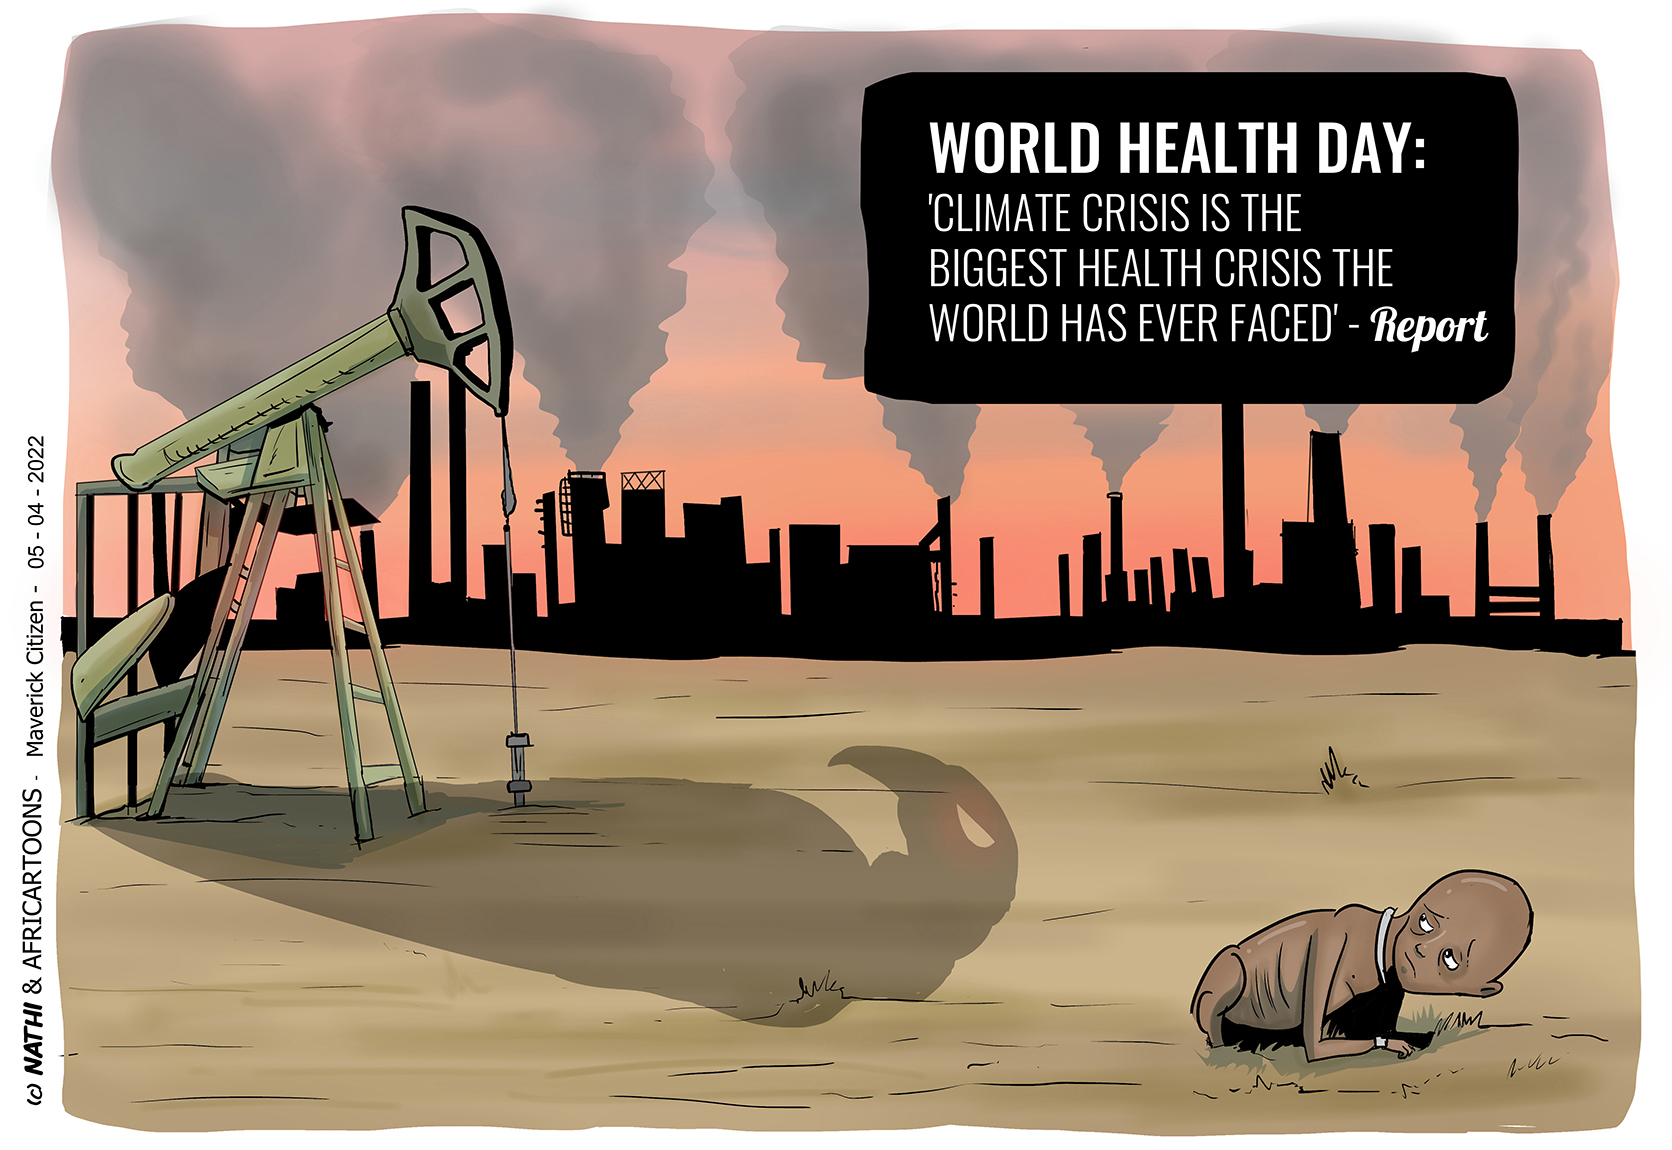 Editorial Cartoons - A SICK WORLD is the prognosis in this cartoon marking World Health Day.